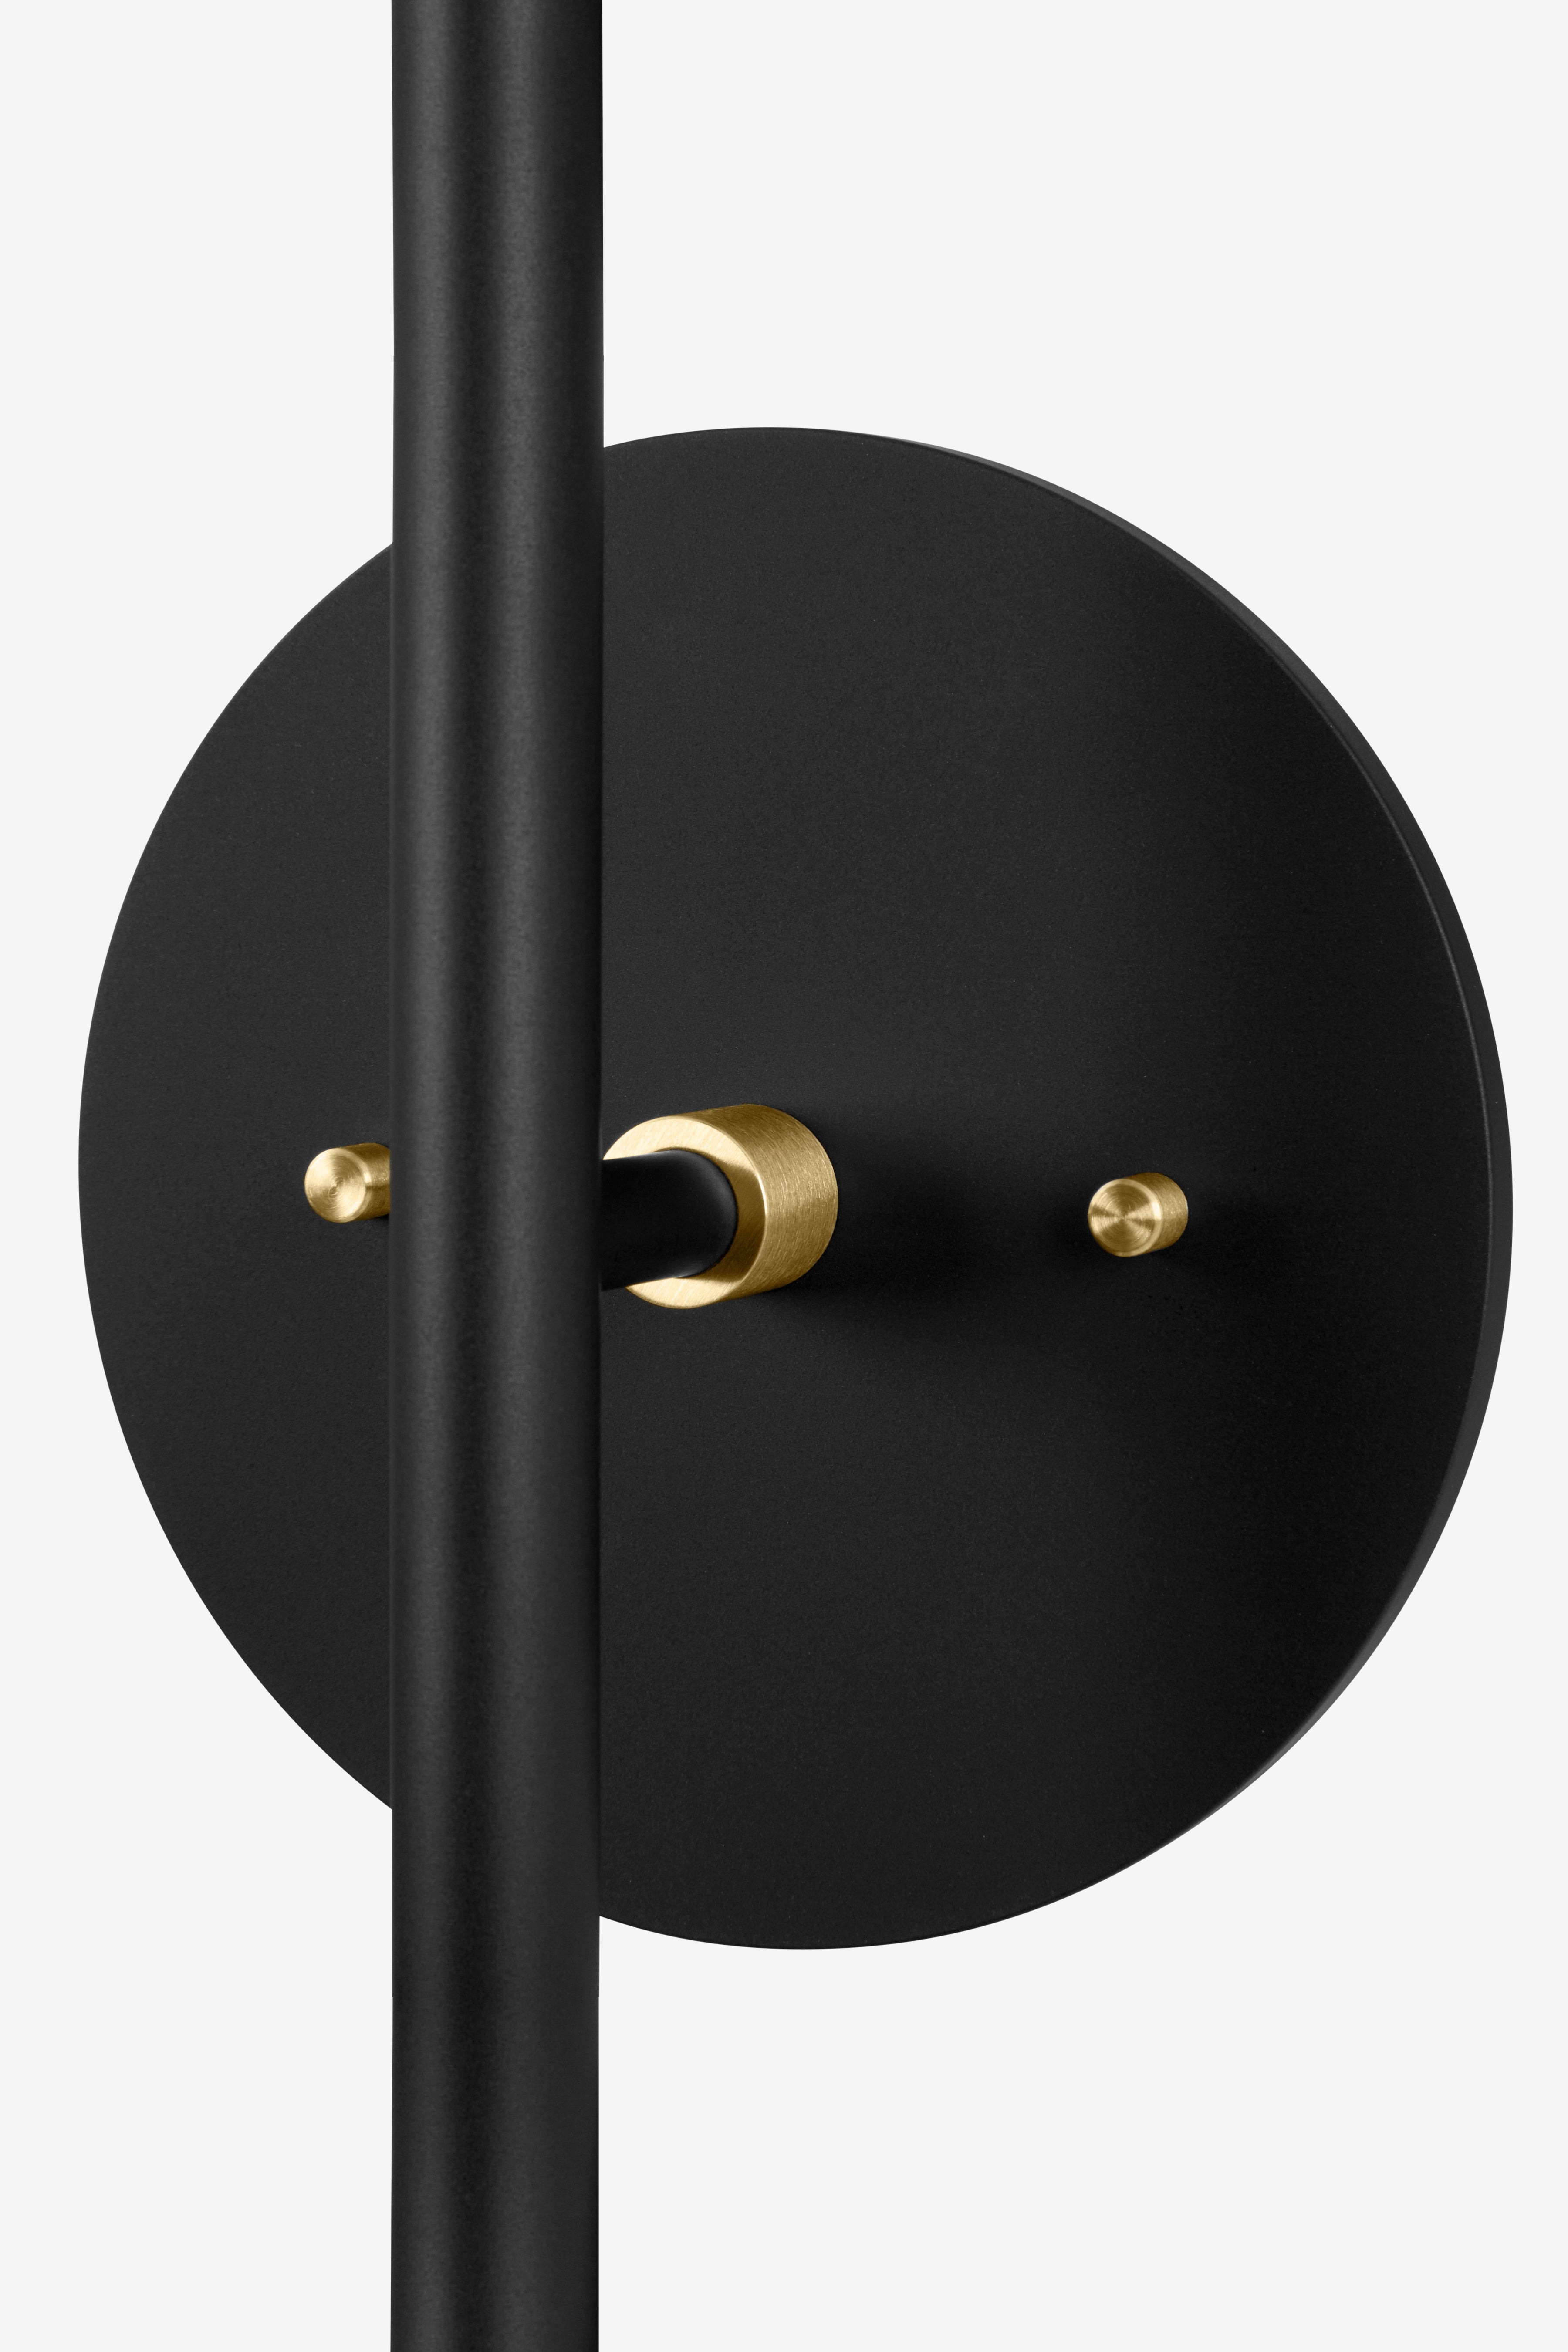 Sausalito Small / Sconce / Black and Brass